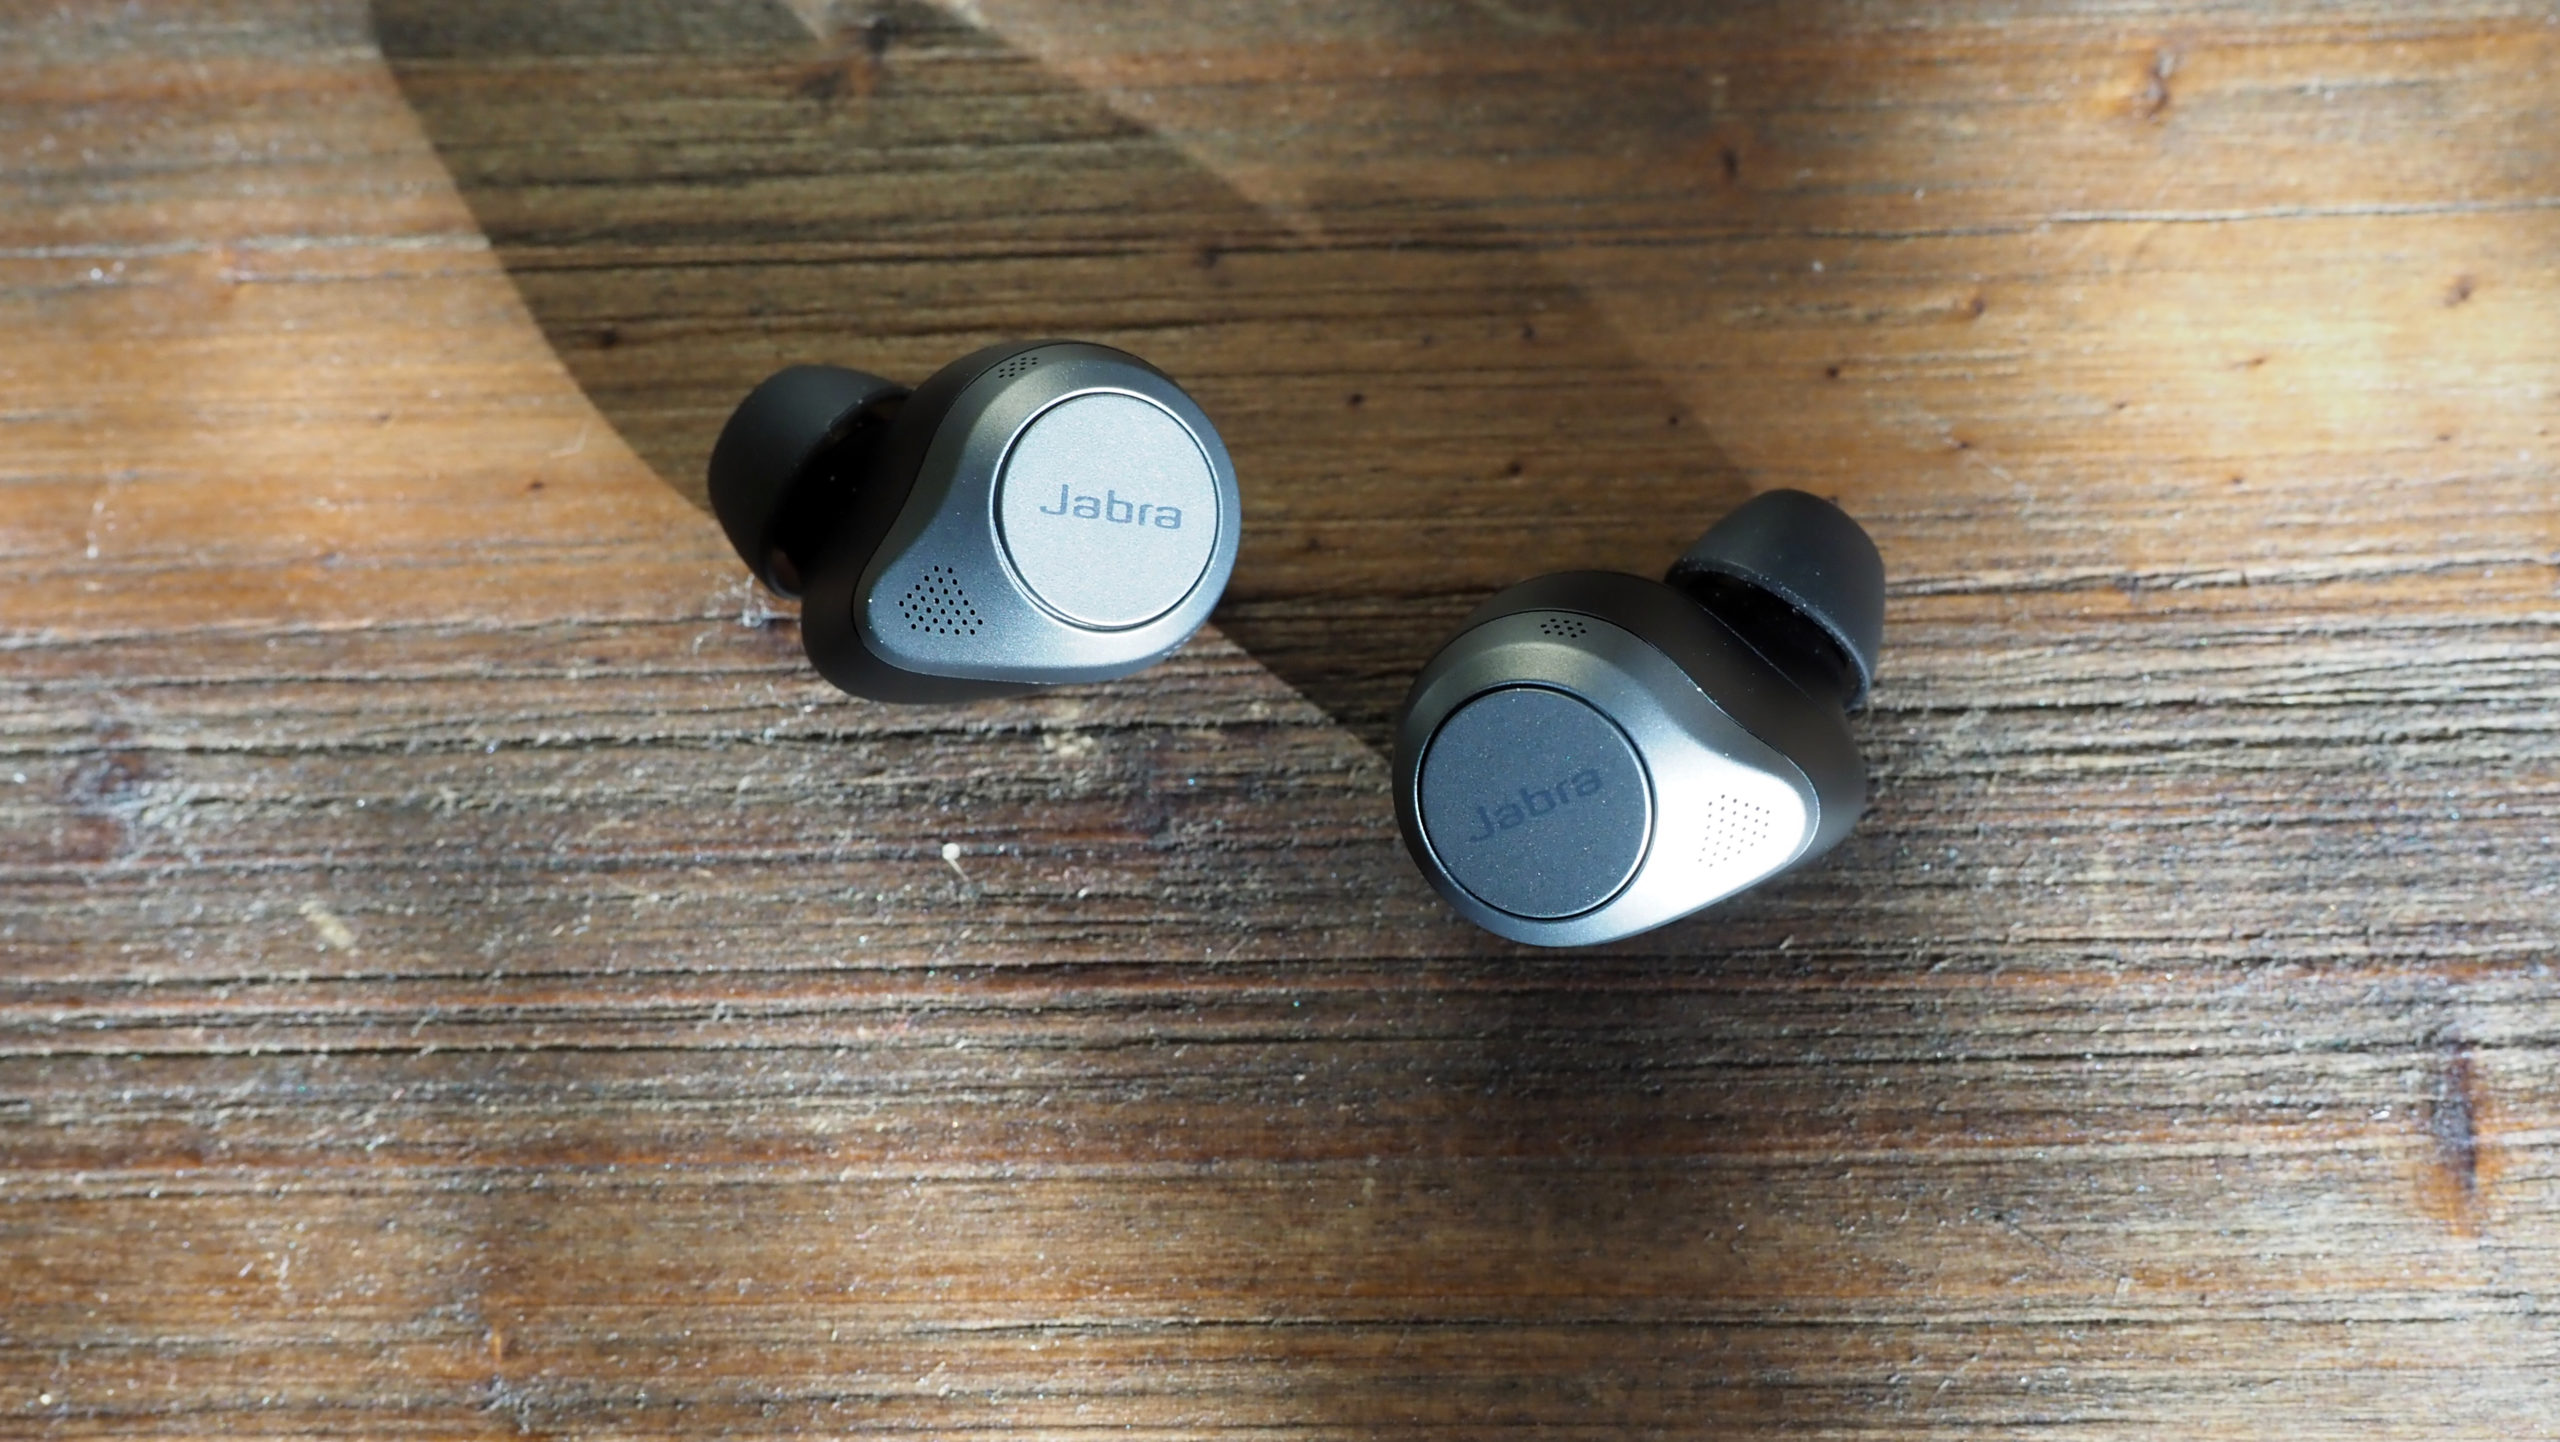 The new Jabras have bigger drivers and more microphones for better audio quality. (Photo: Caitlin McGarry/Gizmodo)